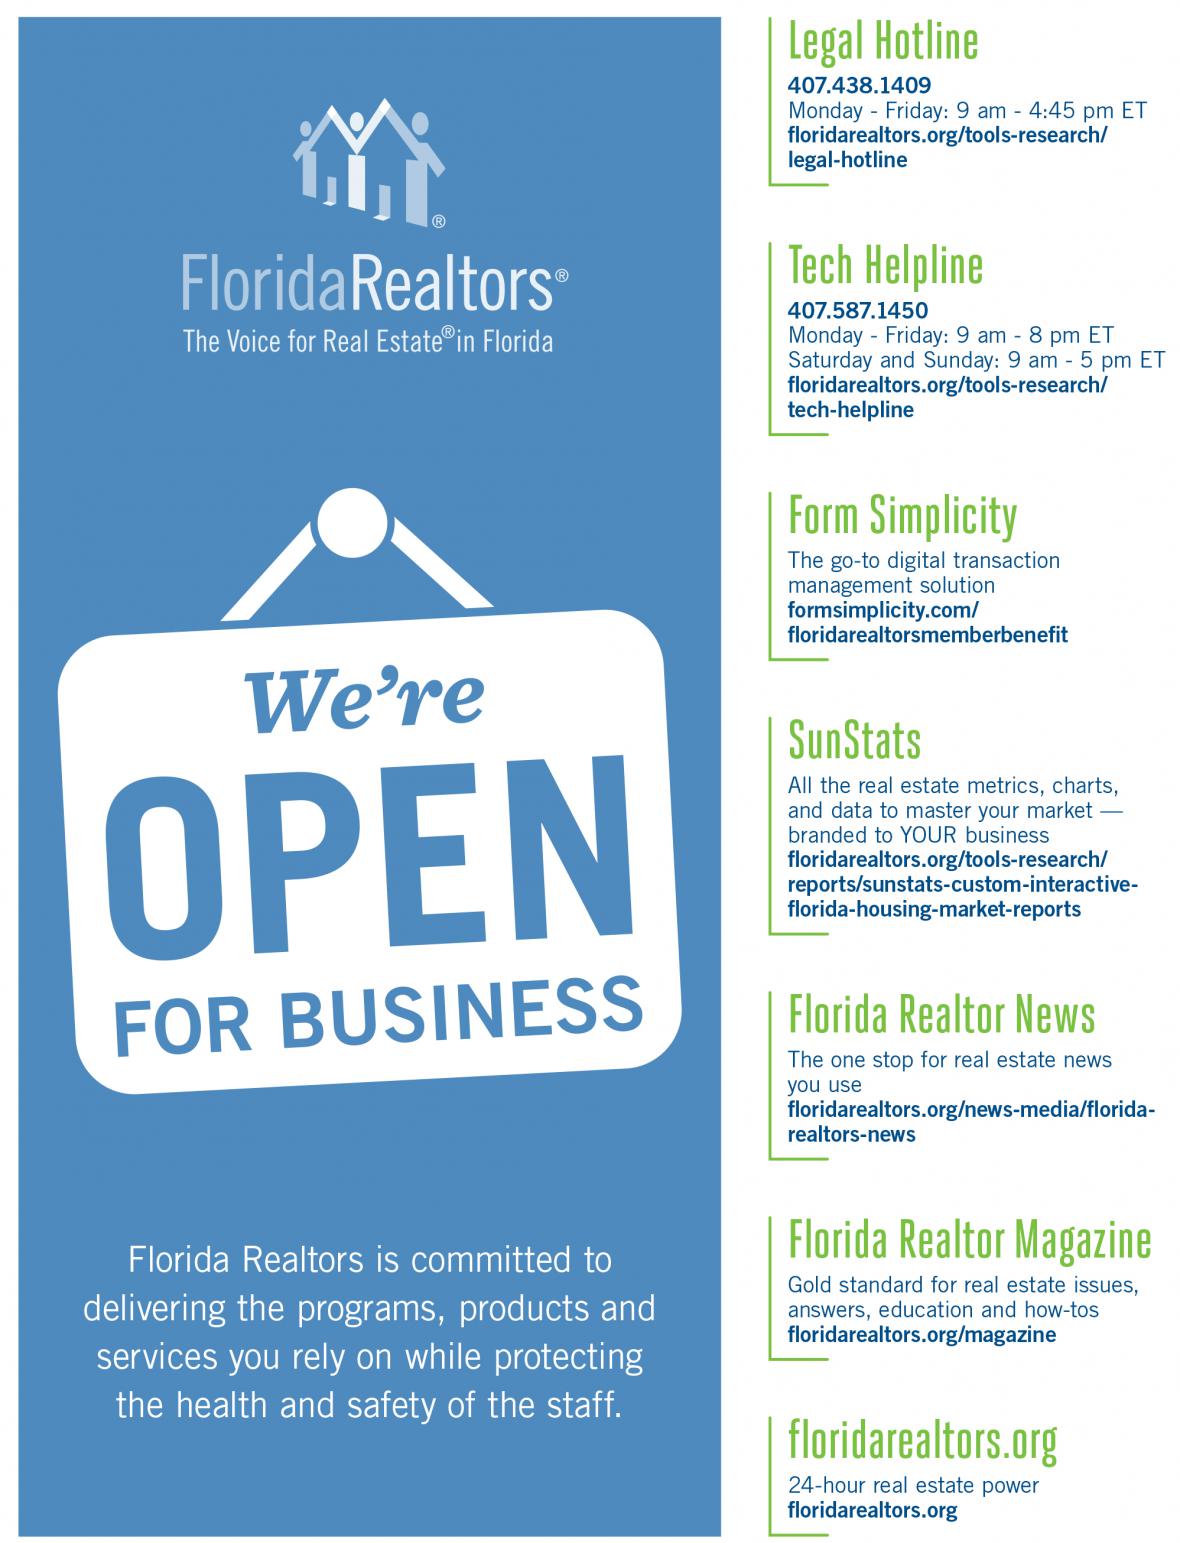 Graphic detailing information about key Florida Realtors programs, products and services